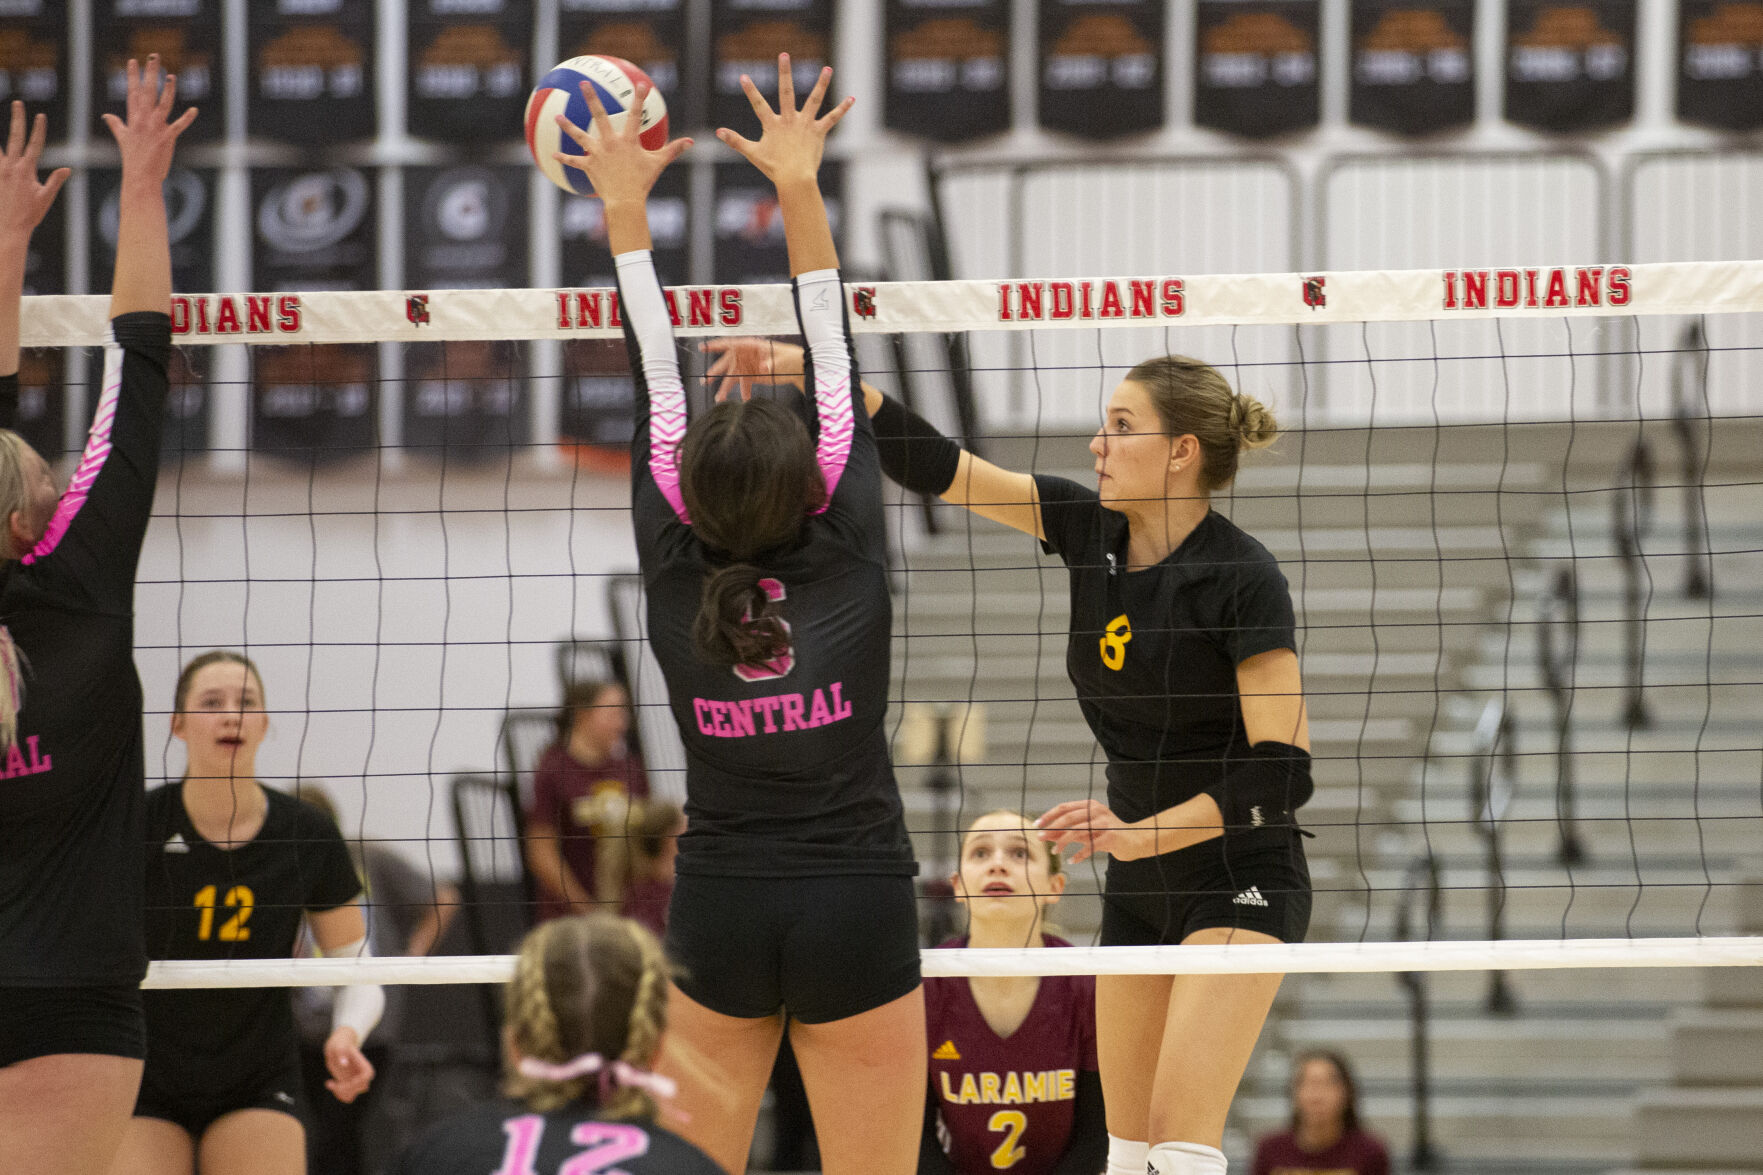 Laramie’s Dominant Performance Leads to a 3-Set Victory over Central